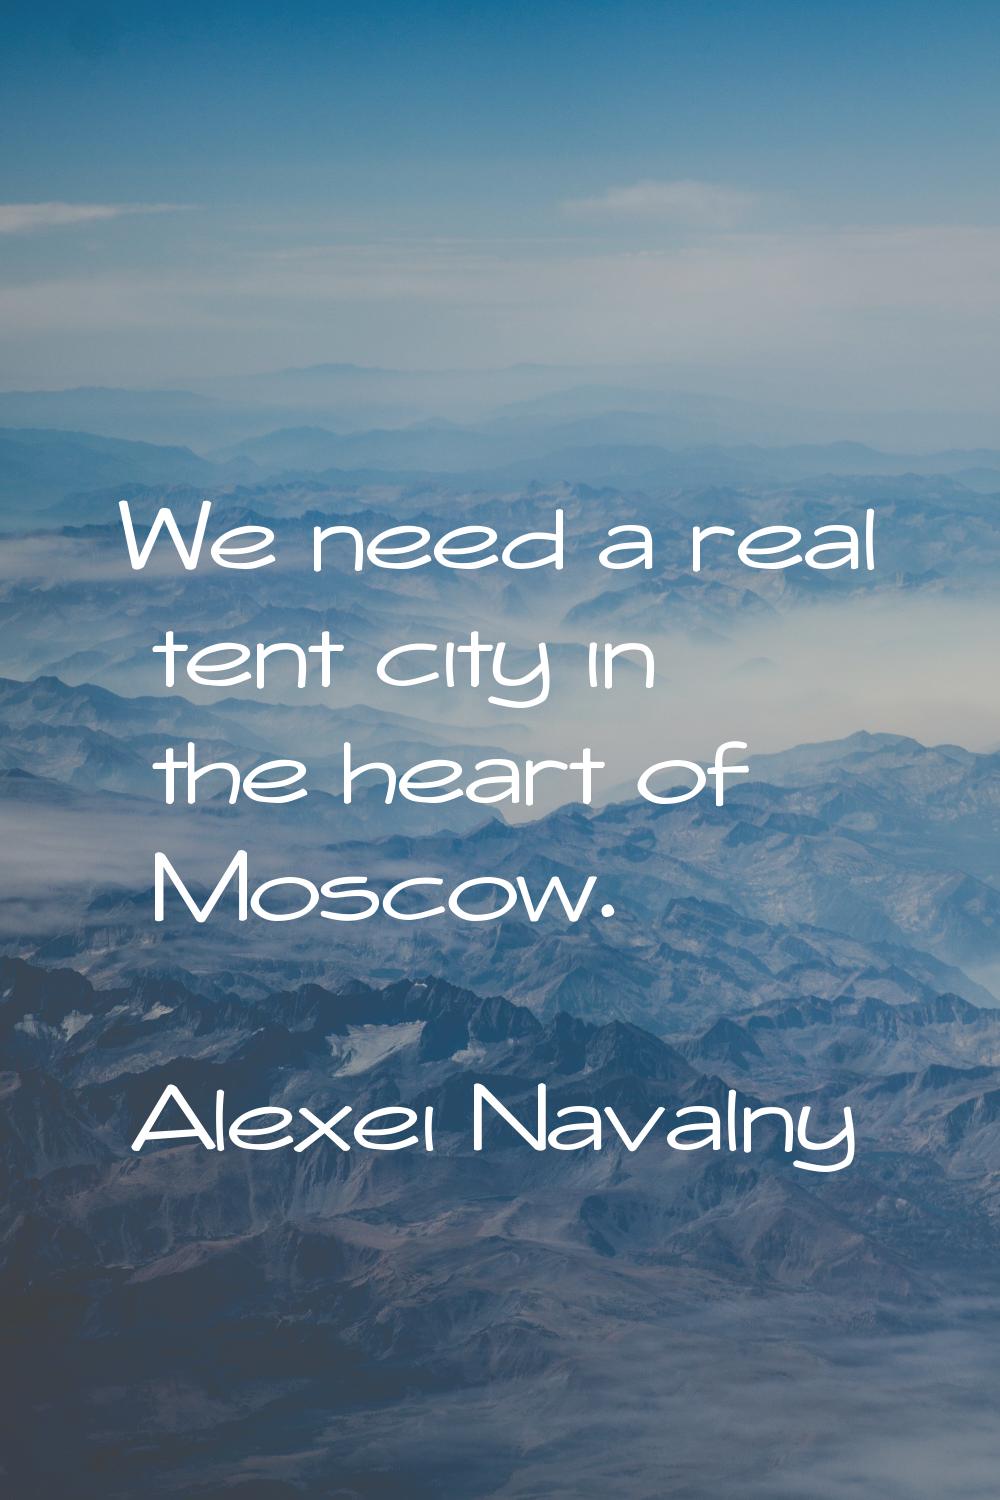 We need a real tent city in the heart of Moscow.